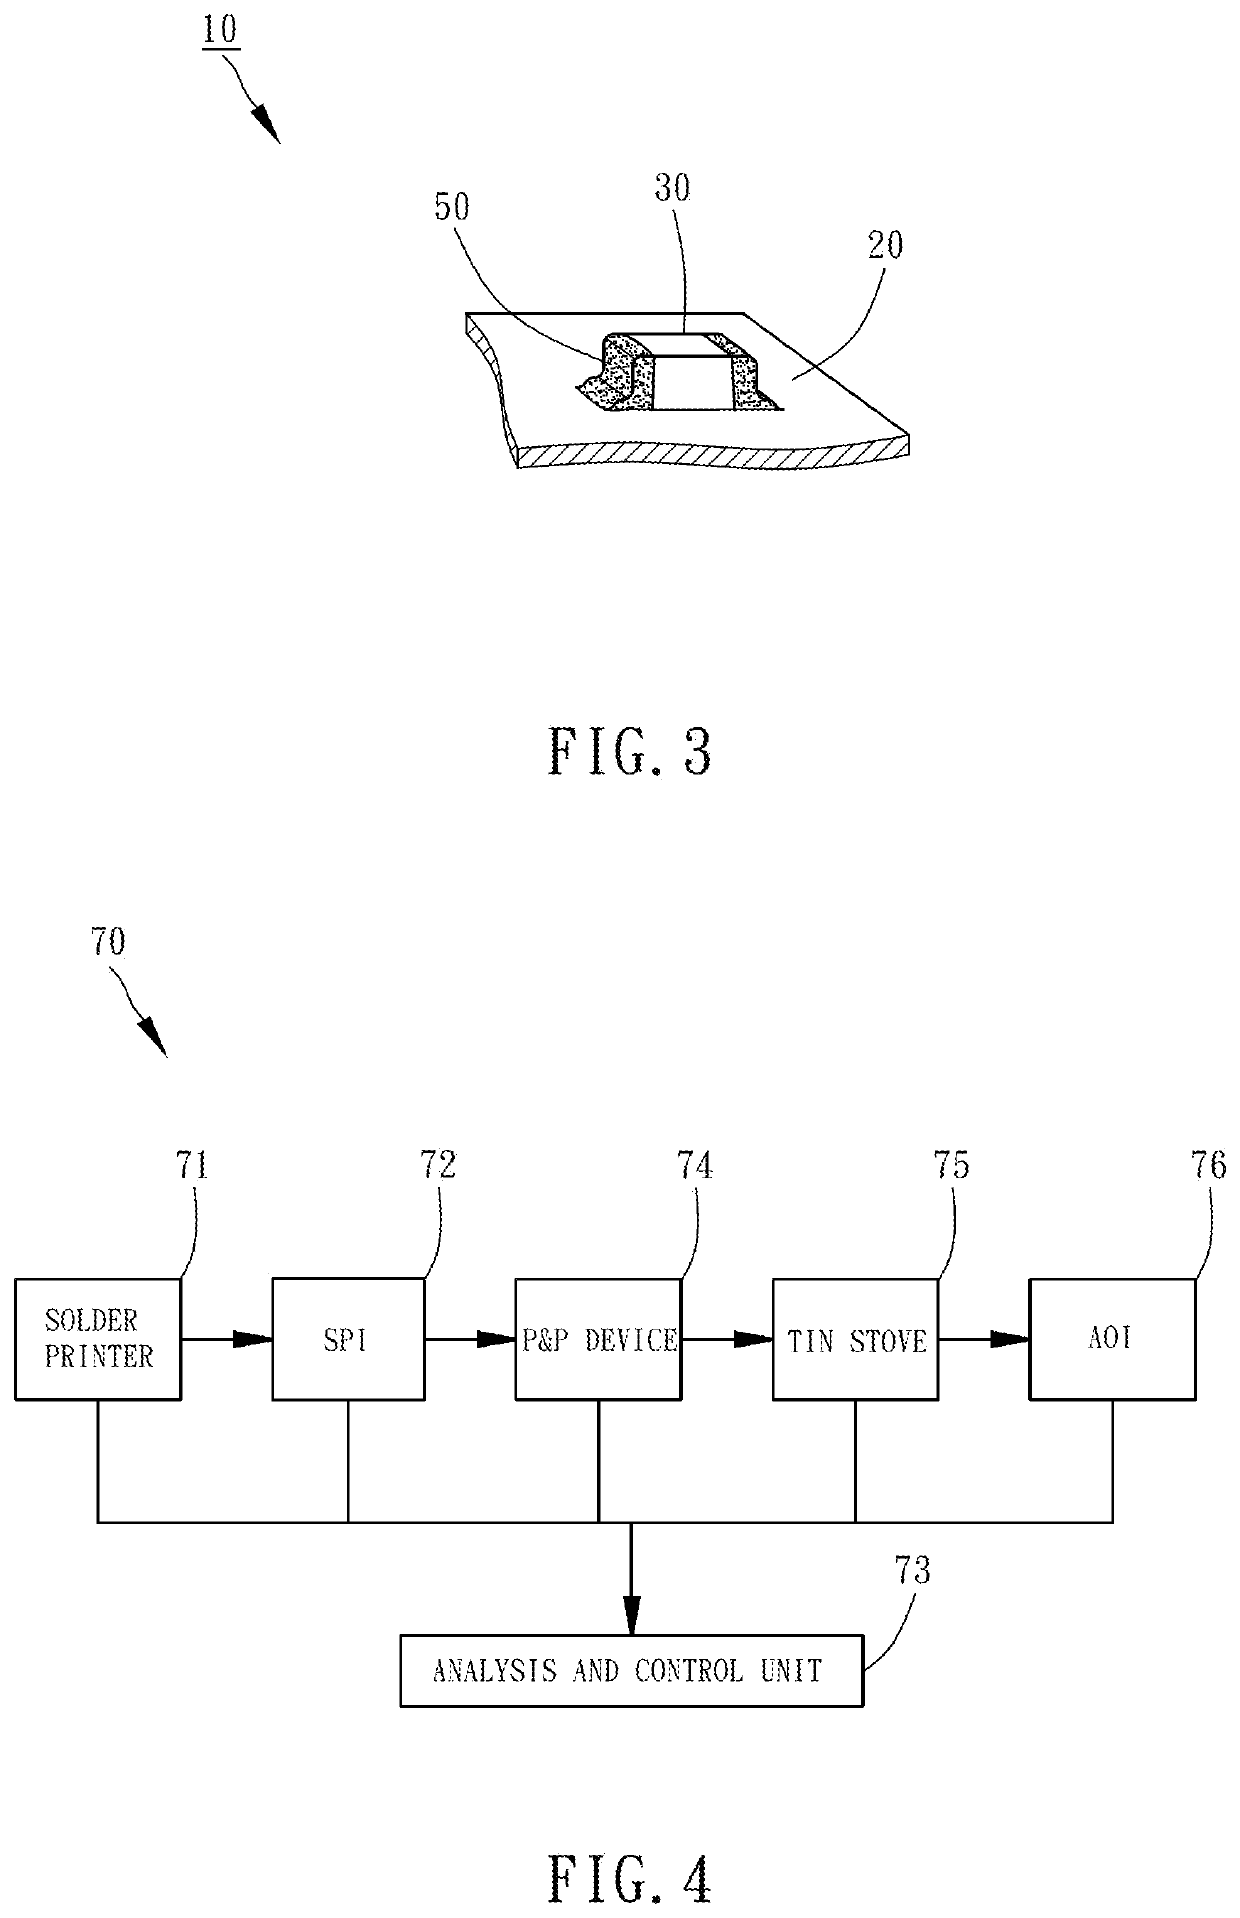 Circuit board assembly inspection method